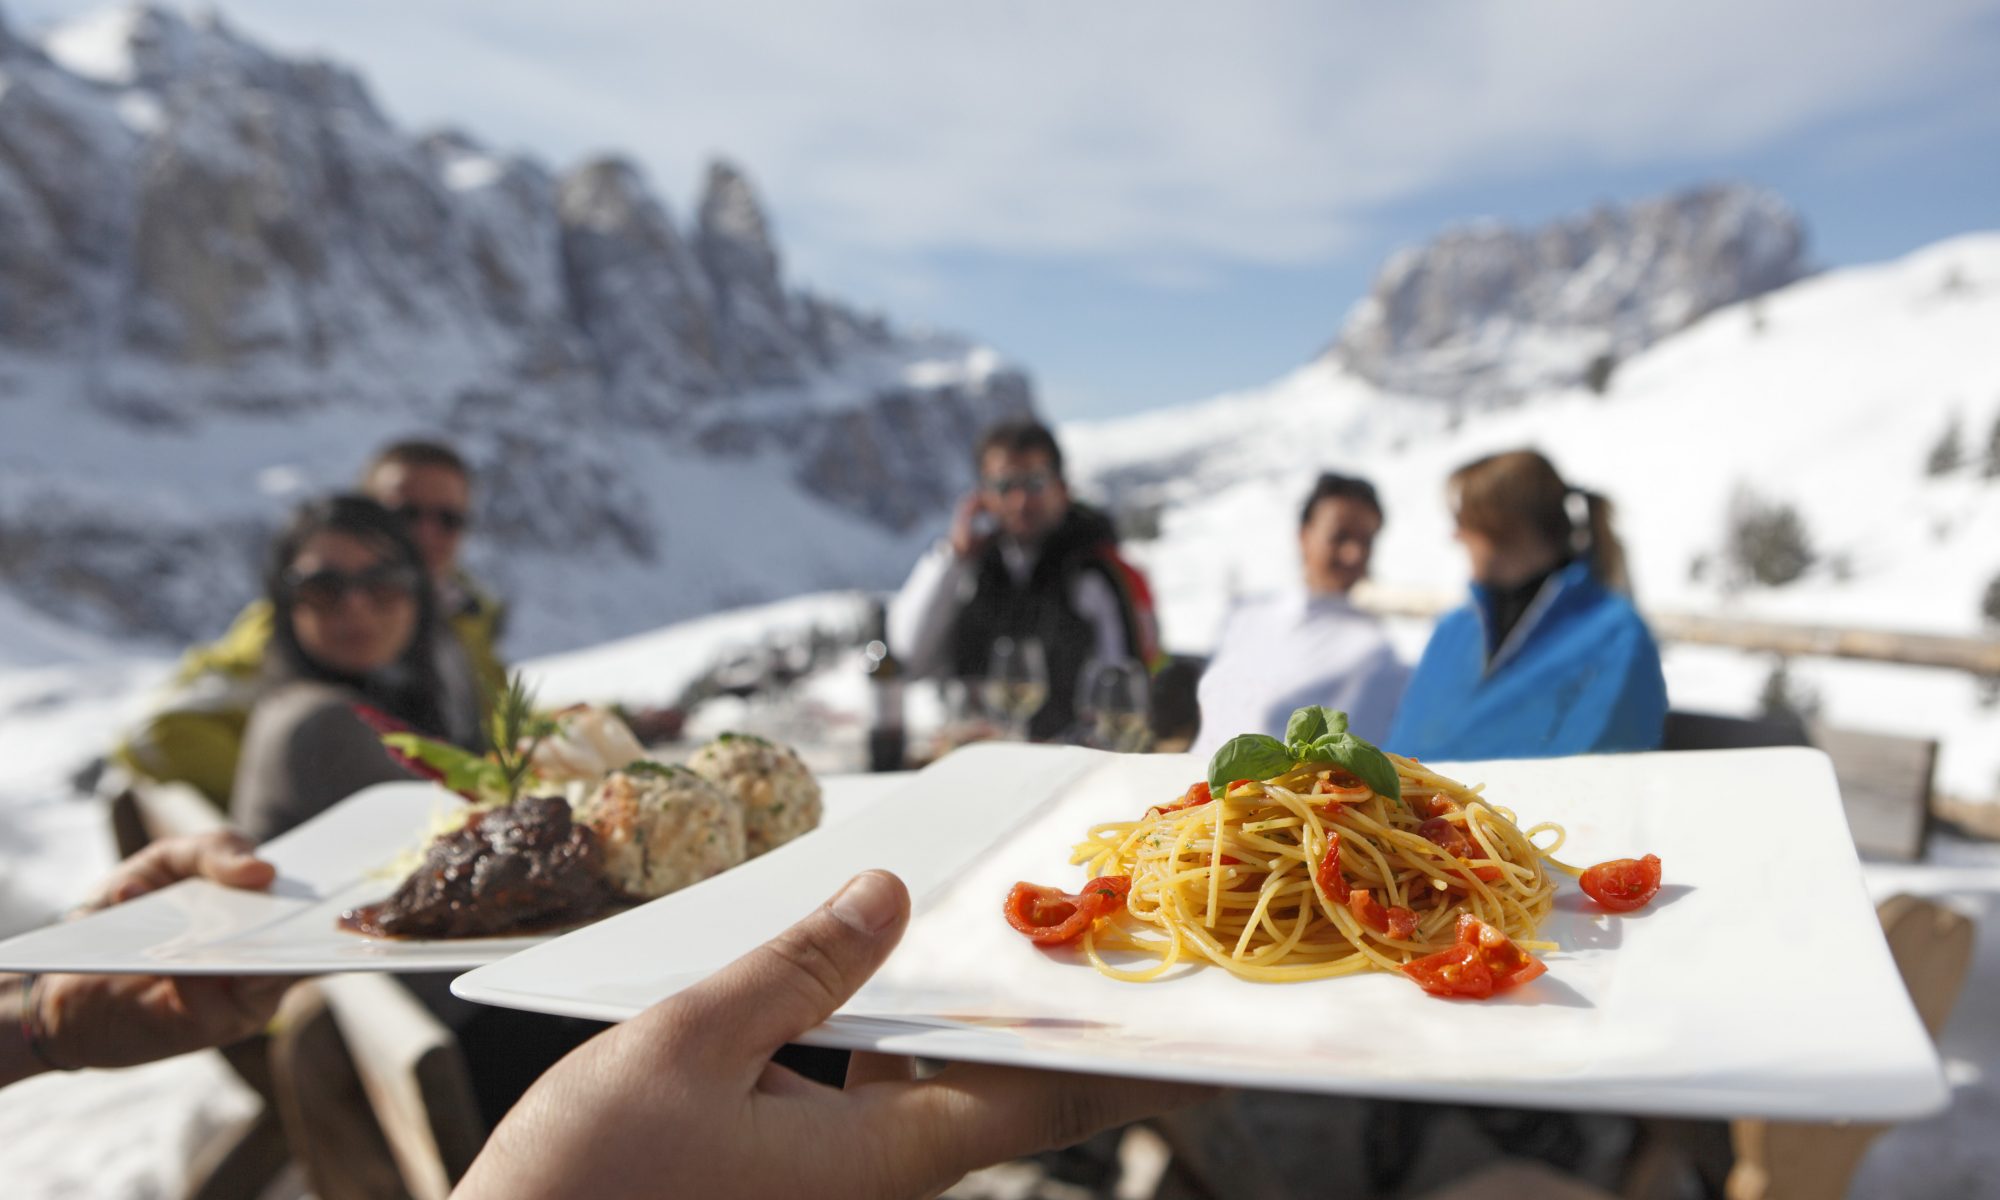 The Alpine huts along the ski slopes of the Gardena Valley serve local fare mixing traditional Italian with South Tyrolean dishes; against the magnificent background of the snow-capped peaks of the Sella Mountain Group in the Dolomites. Photo: IDM Sudtirol - The roof of the Rifugio Comici in Selva Val Gardena was restored in record time. Photo: IDM Sudtirol - The roof of the Rifugio Comici in Selva Val Gardena was restored in record time.